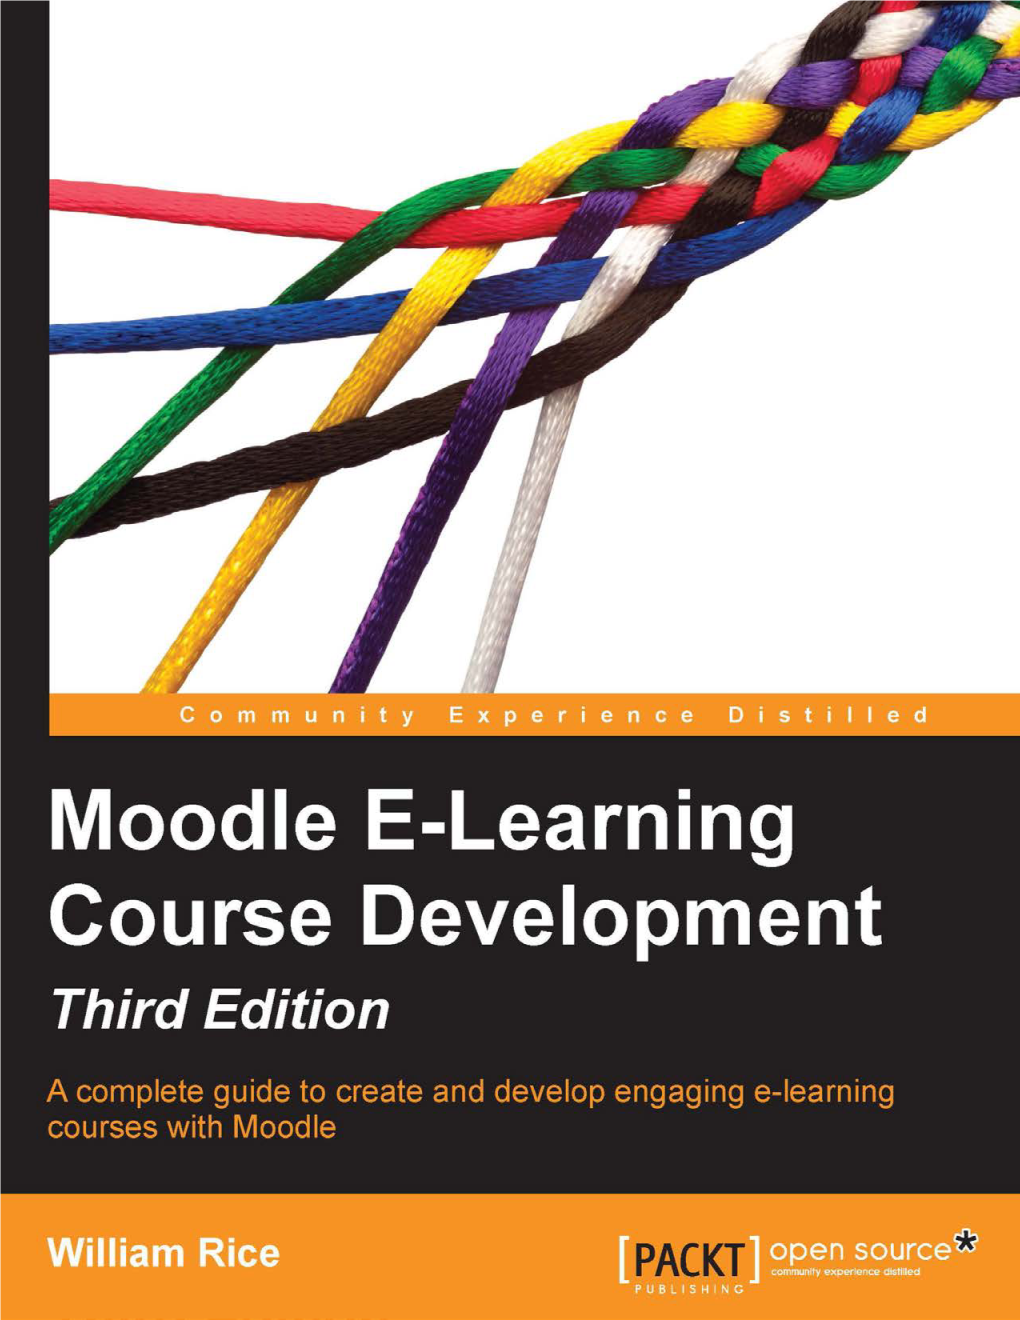 Moodle E-Learning Course Development Third Edition